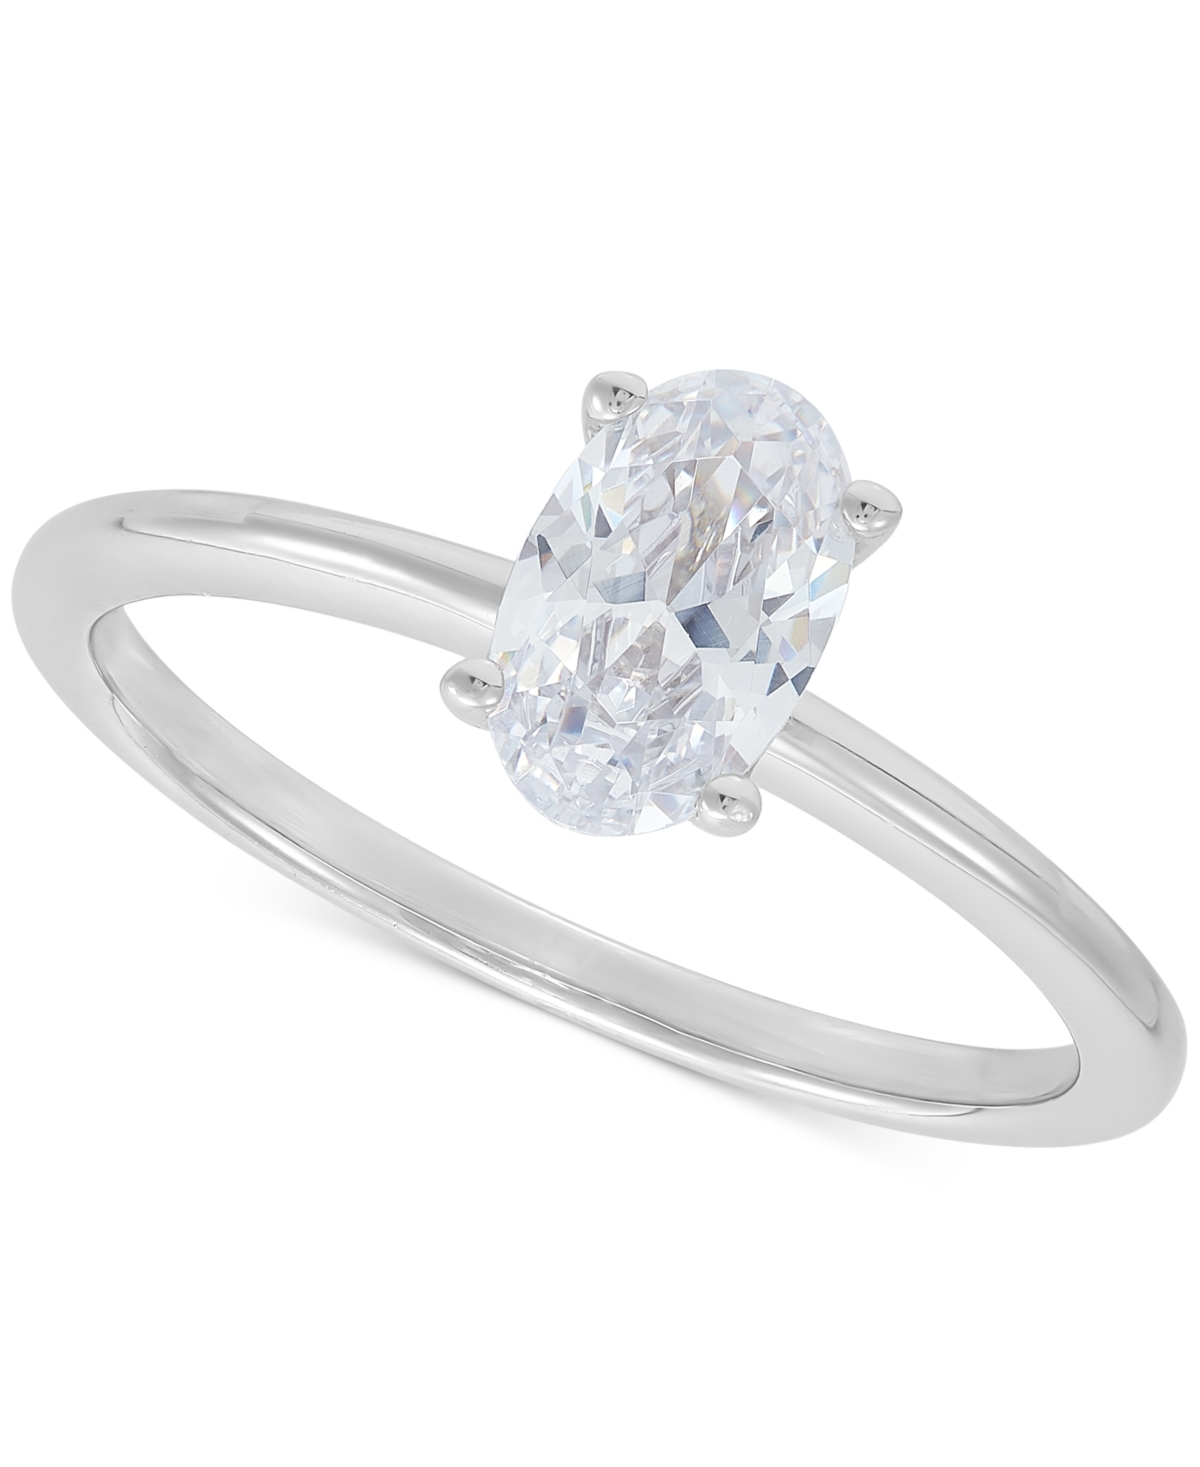 Grown With Love Igi Certified Lab Grown Diamond Oval Solitaire Engagement Ring (1 ct. t.w.) in 14k White Gold